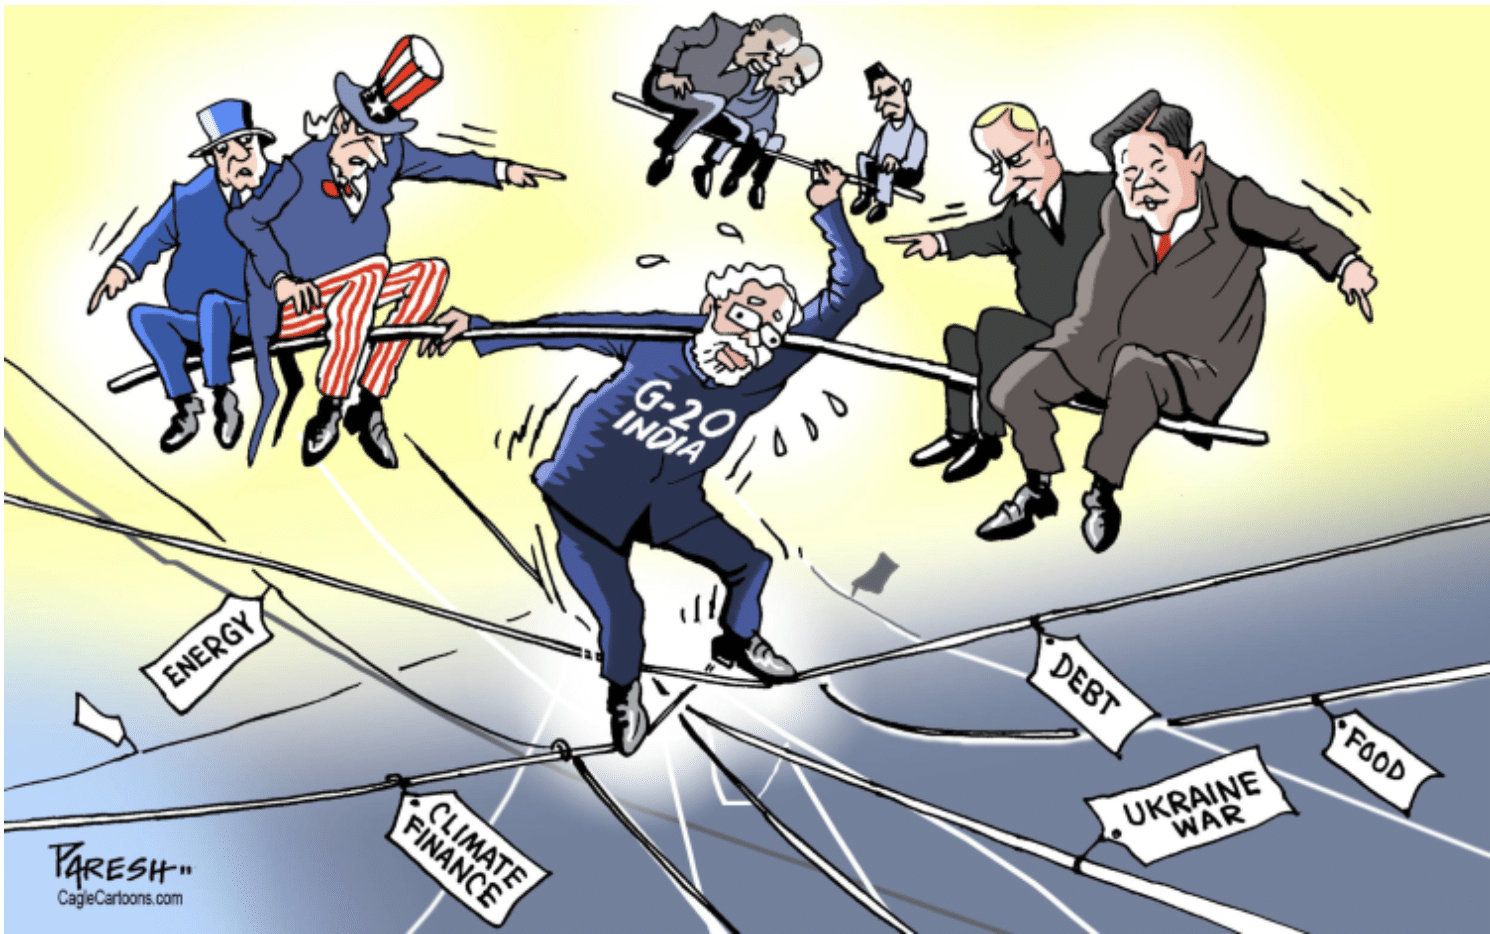 cartoon of PM Modi juggling competing factions at g20 summit in India.